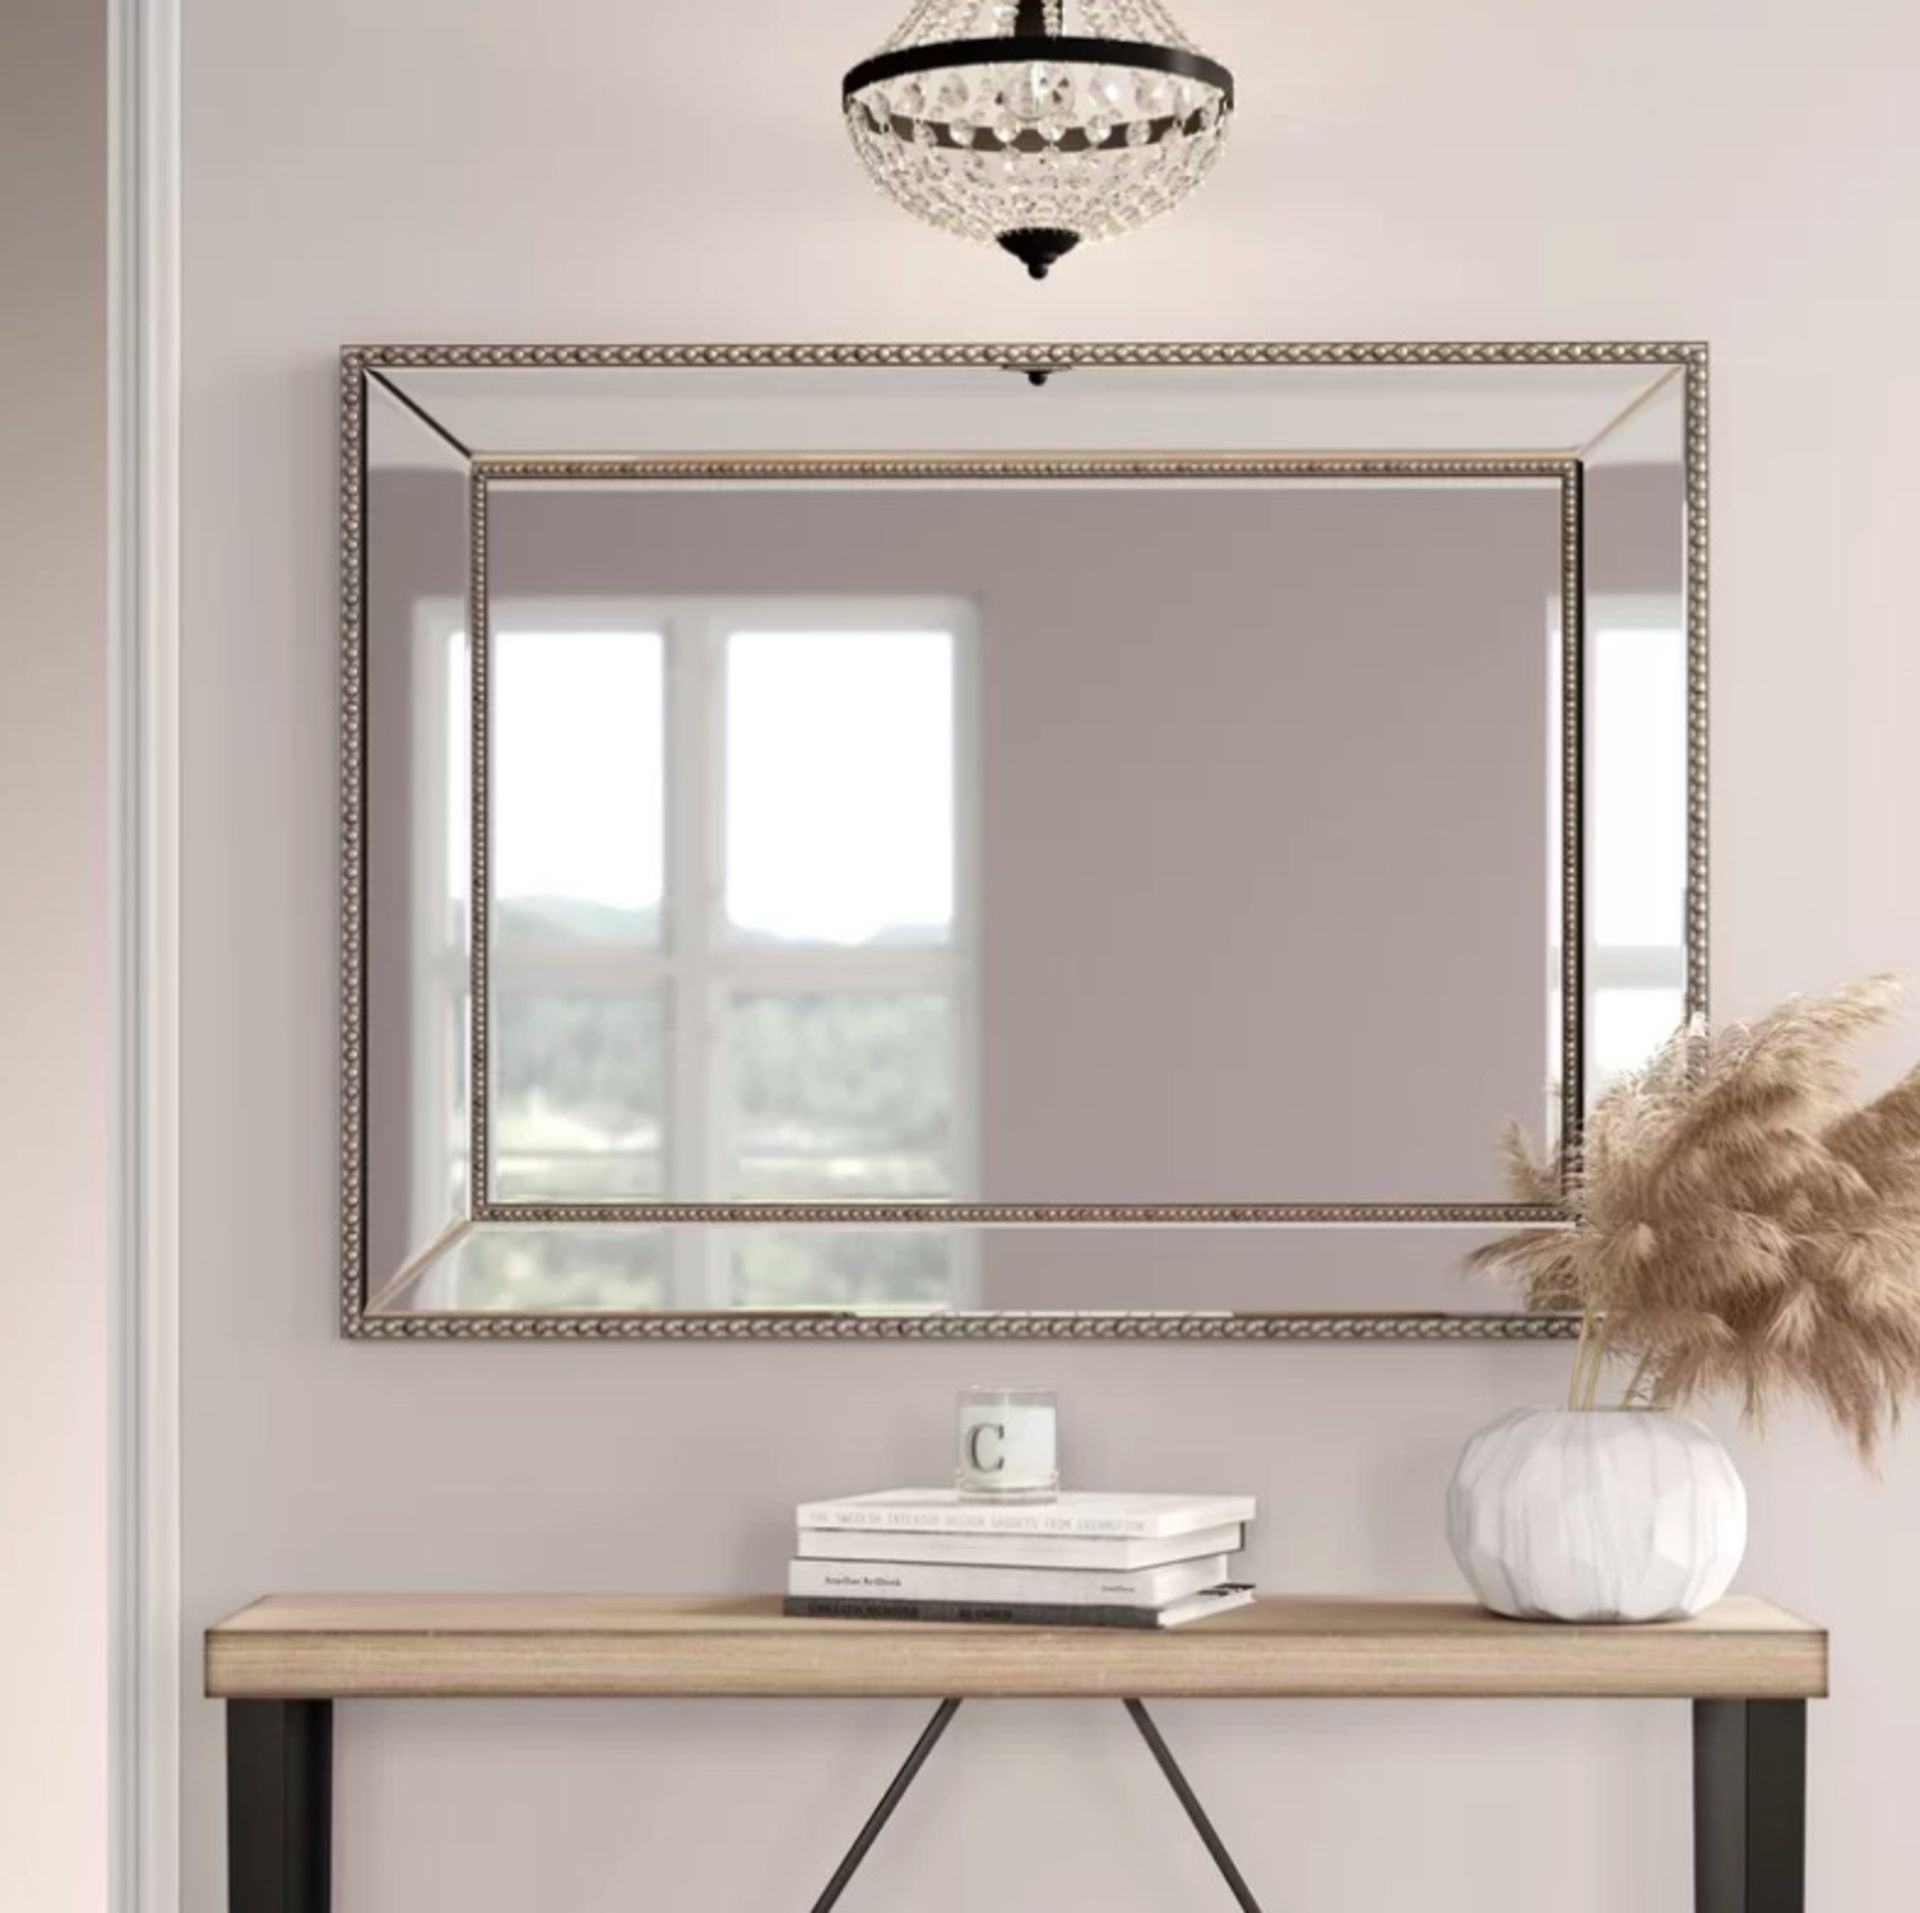 Elegant Wall Mirror This beaded wall mirror will add an elegant finishing touch to your room